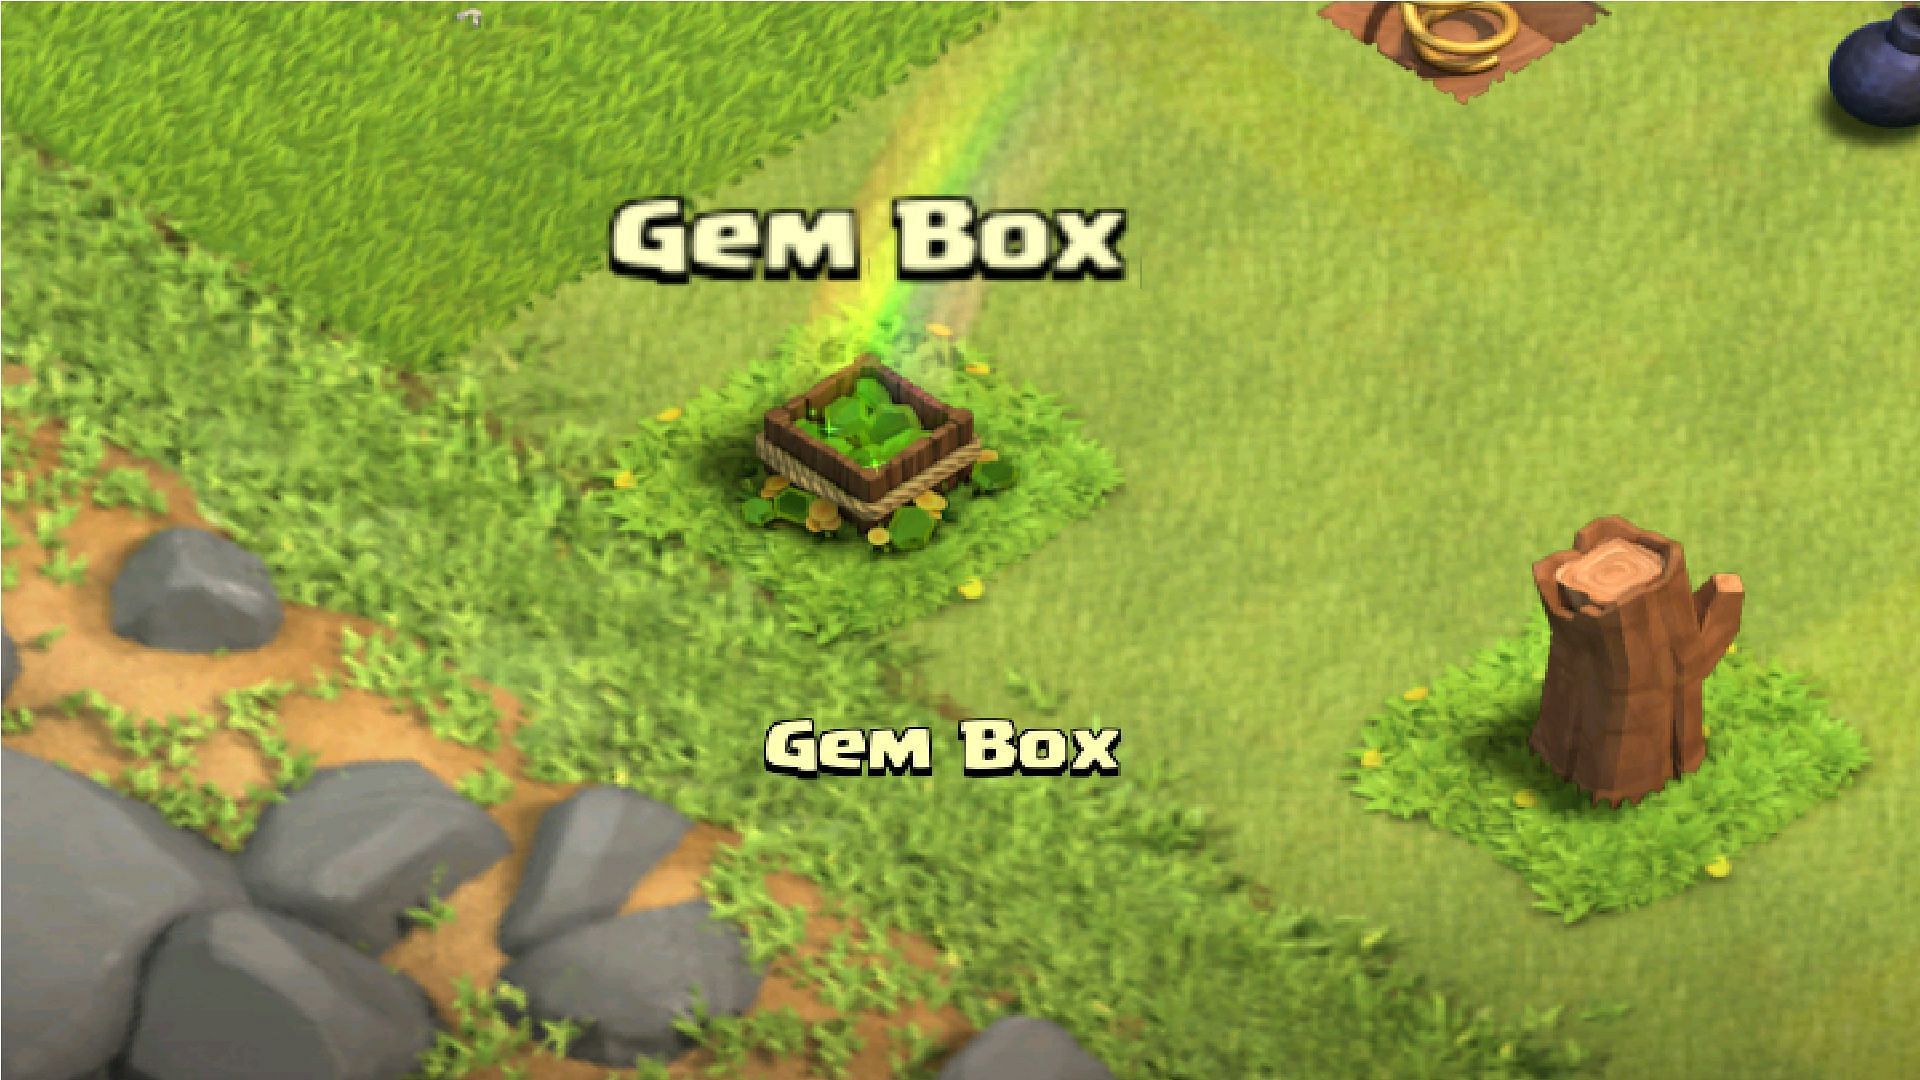 Remove gem boxes for more free gems in Clash of Clans (Image via Supercell)